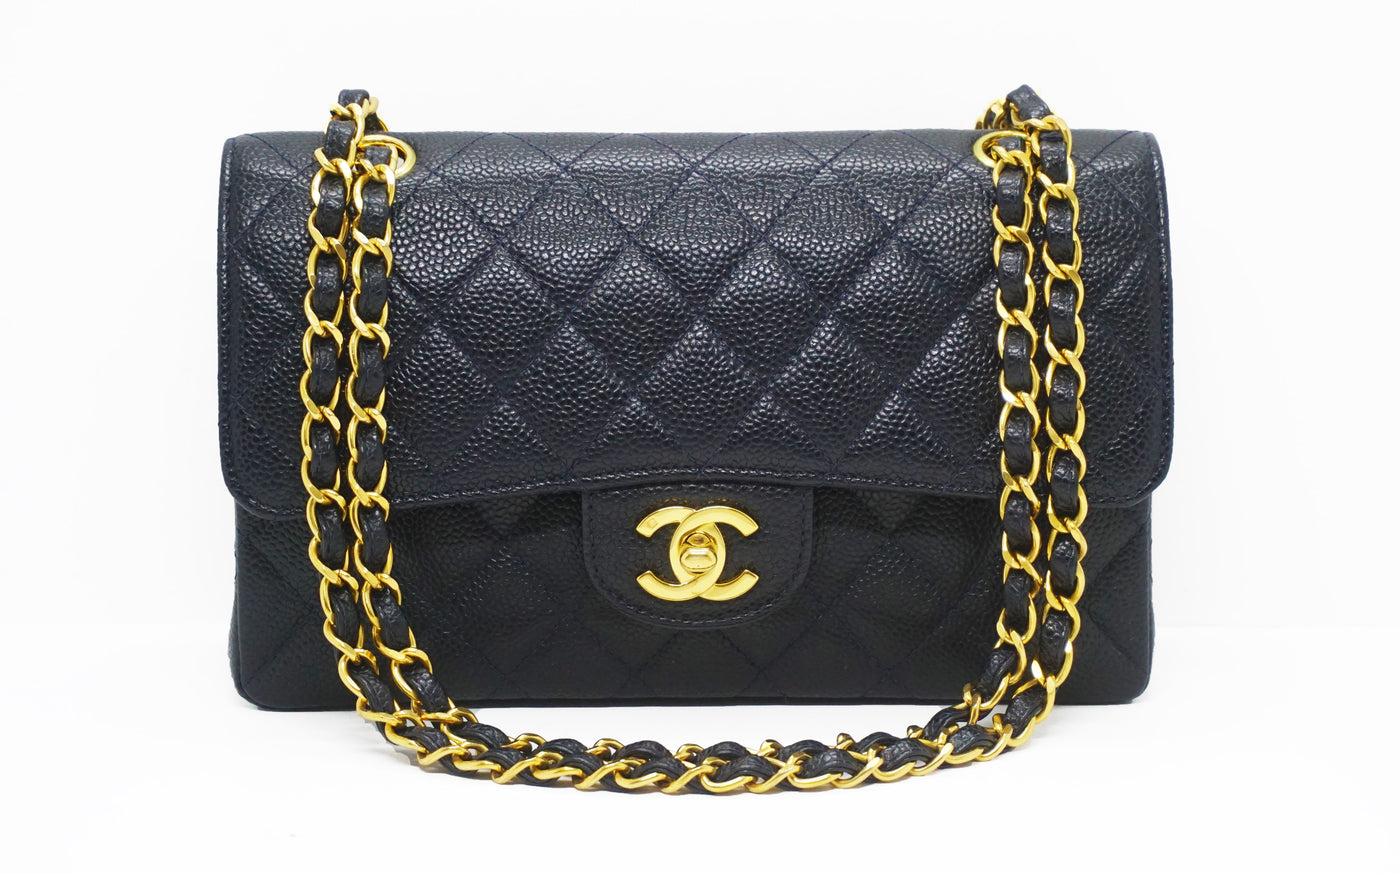 Chanel Vintage Navy Caviar Small Classic Double Flap Bag